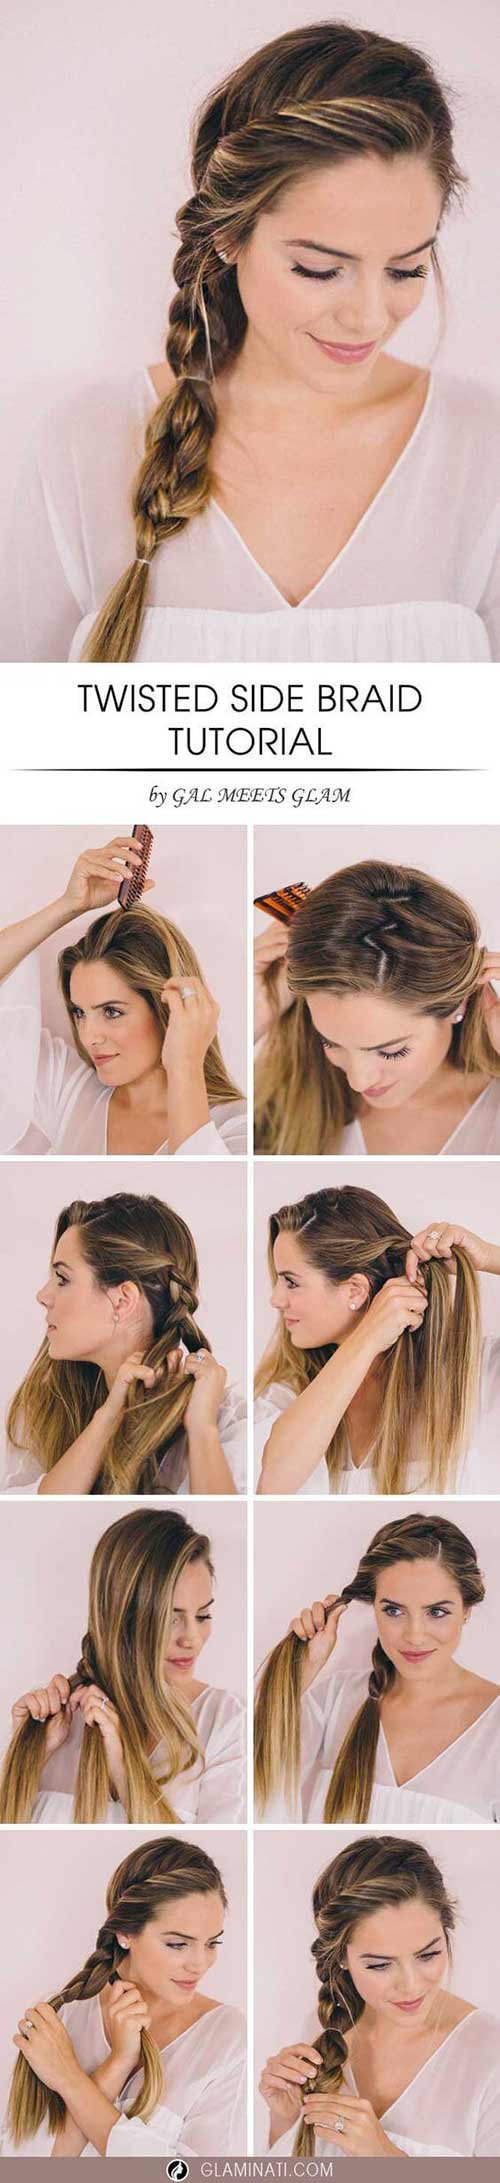 20 awesome hairstyles for girls with long hair